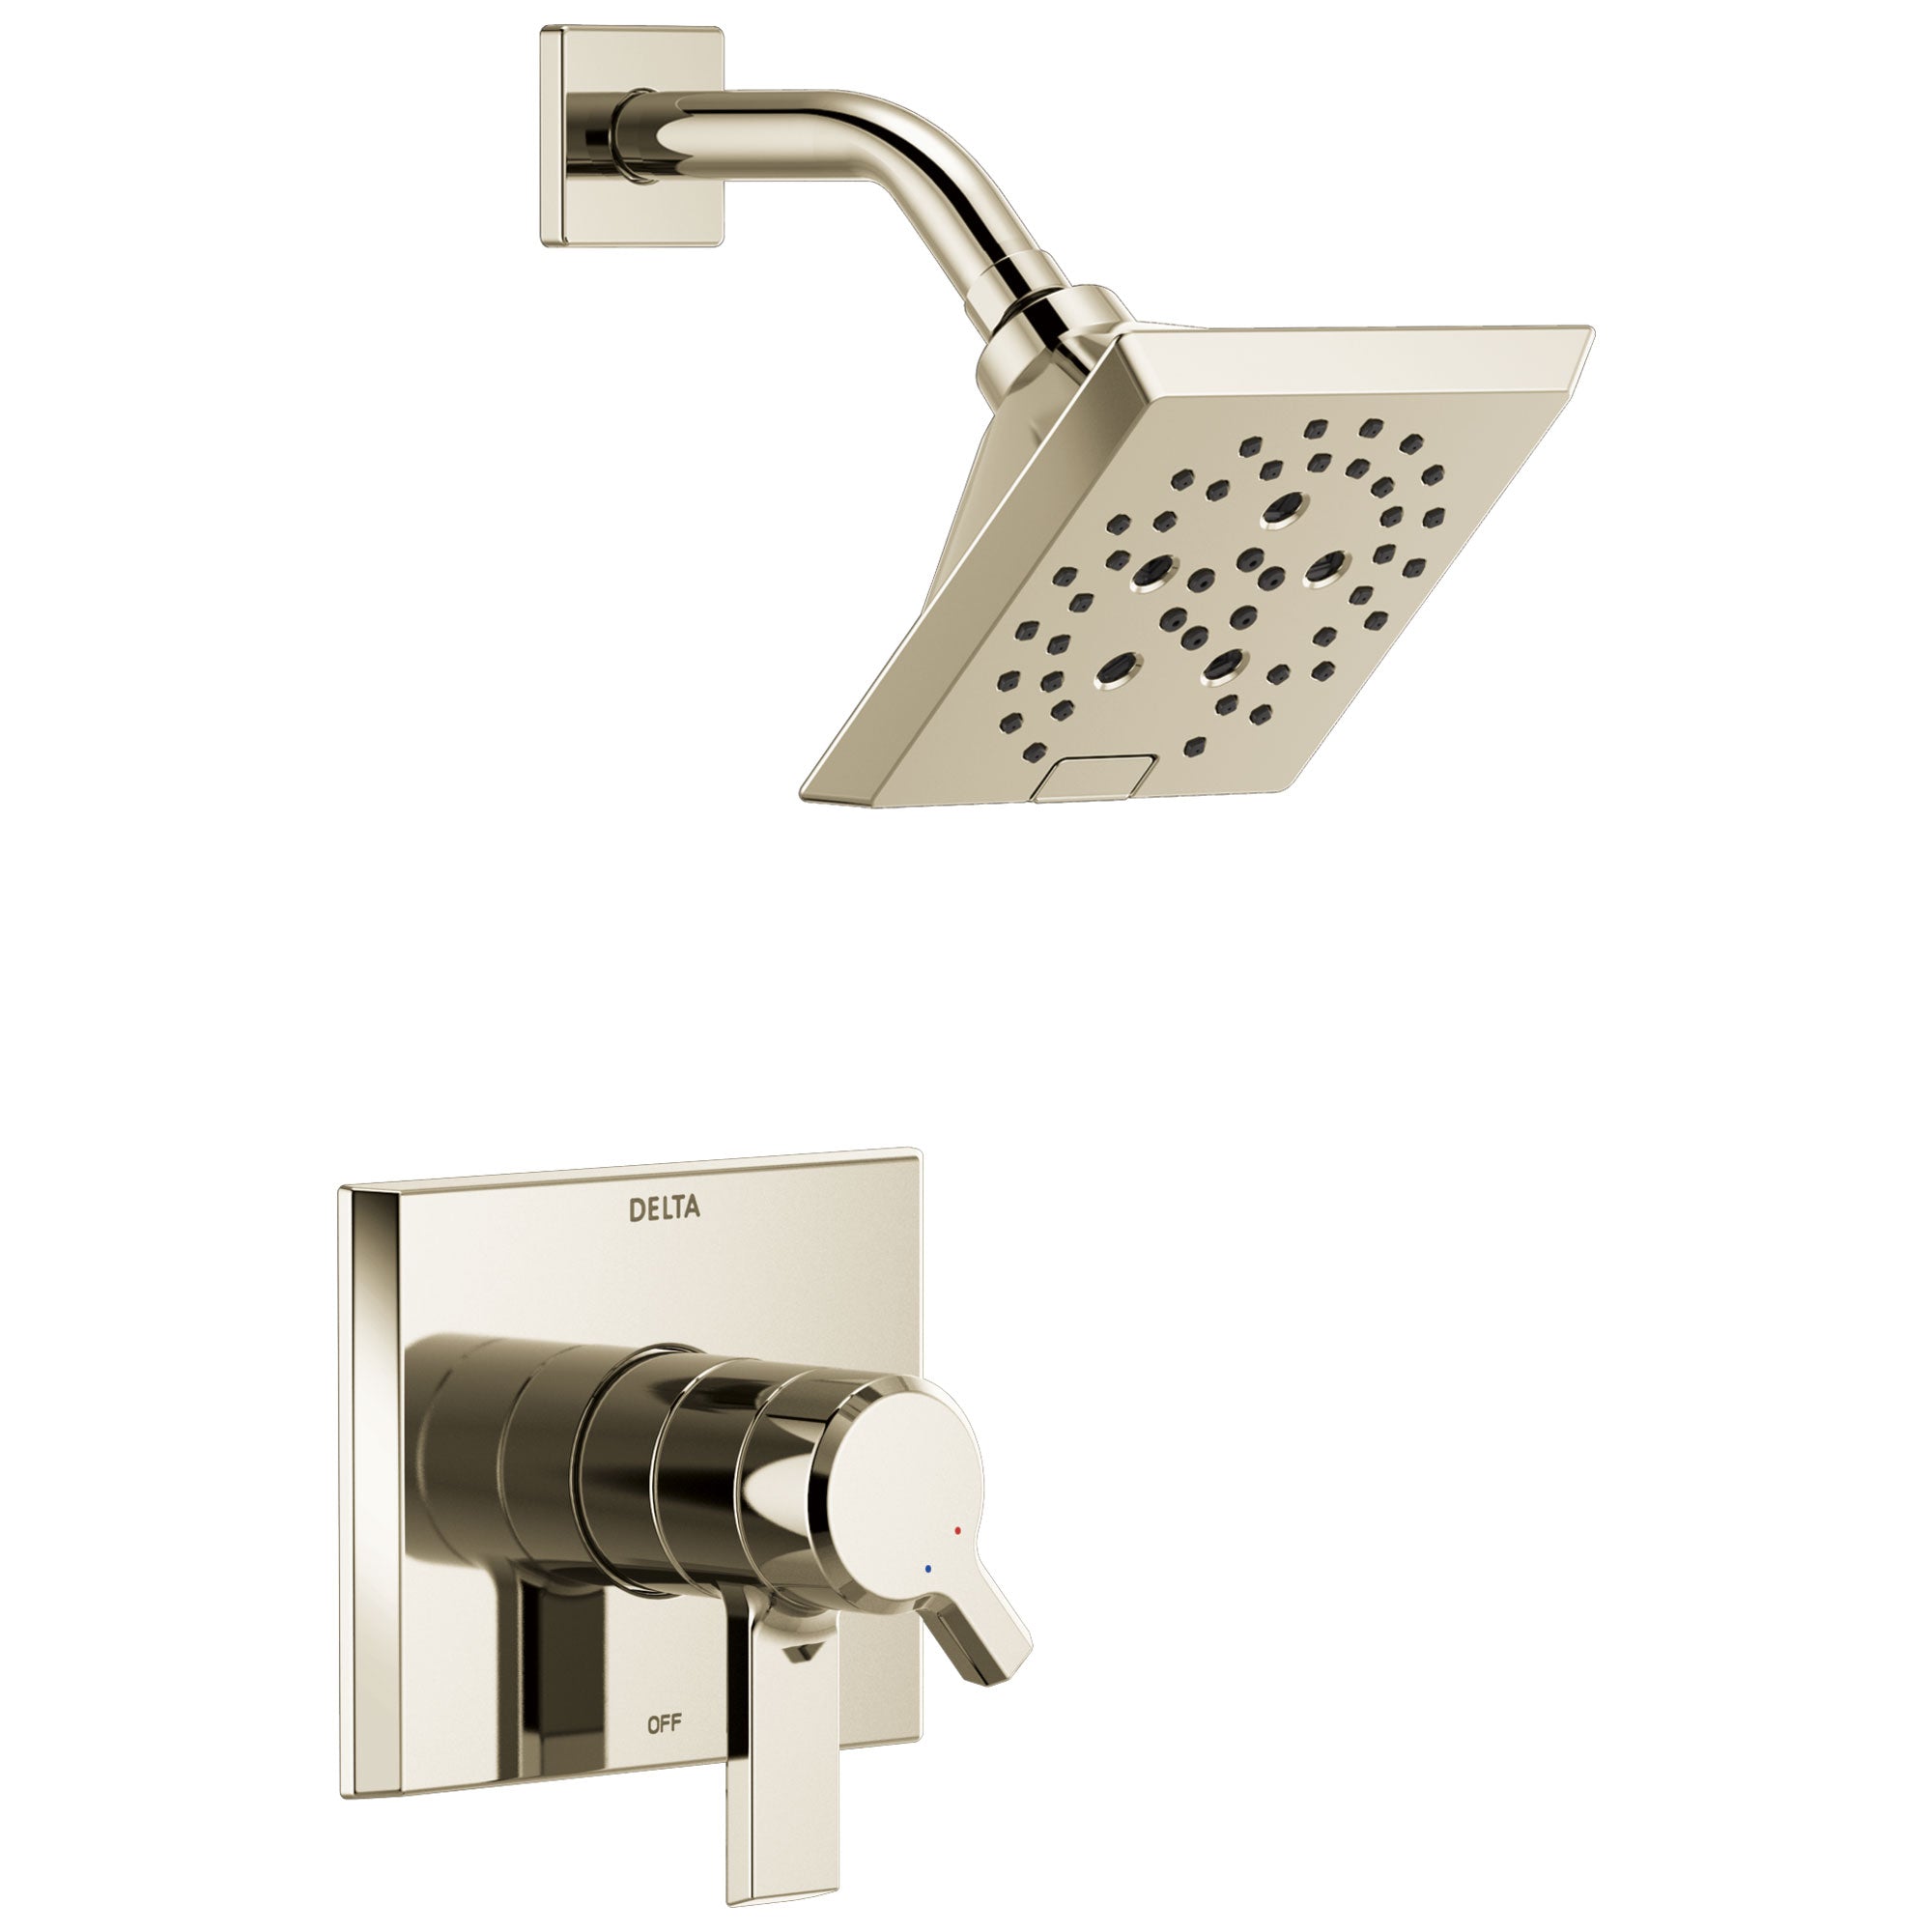 Delta Pivotal Modern Polished Nickel Finish H2Okinetic Shower only Faucet Includes 17 Series Cartridge, Handles, and Valve without Stops D3357V